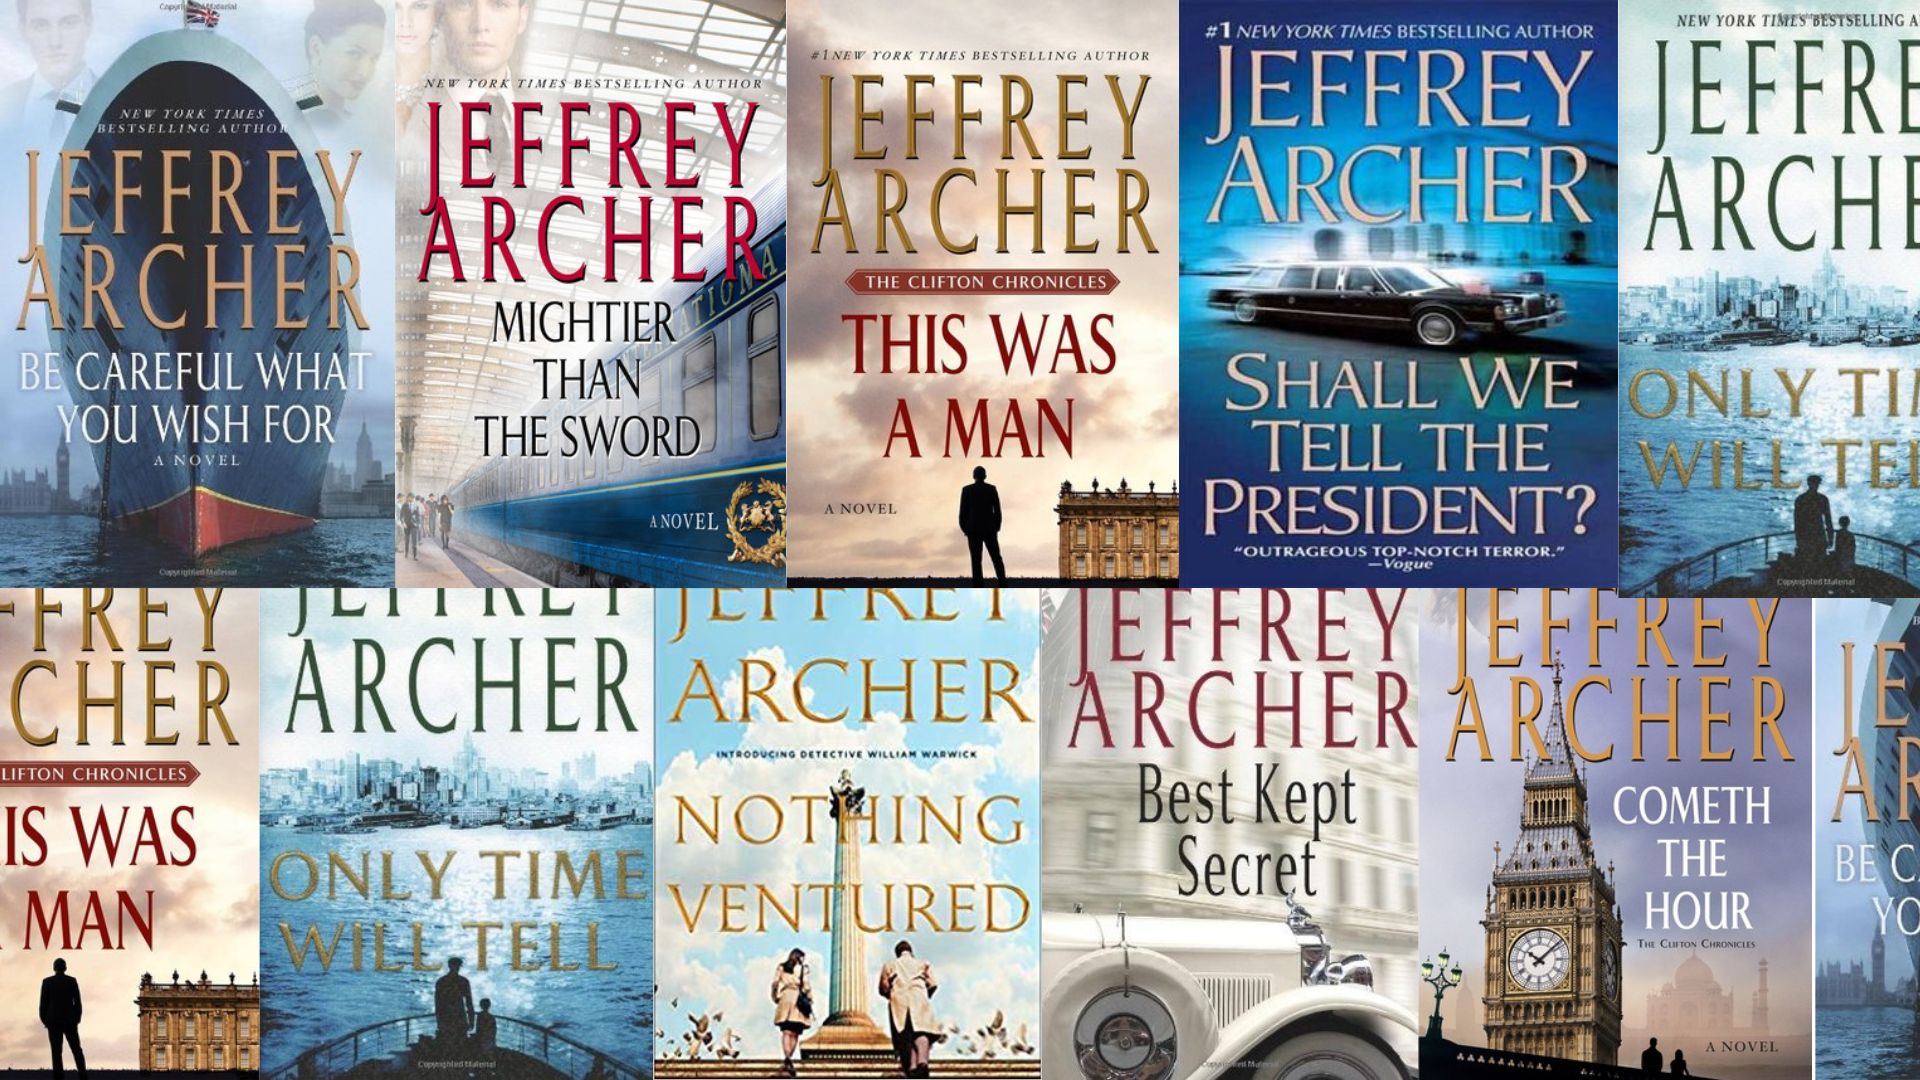 How To Read Jeffrey Archer Books In Order